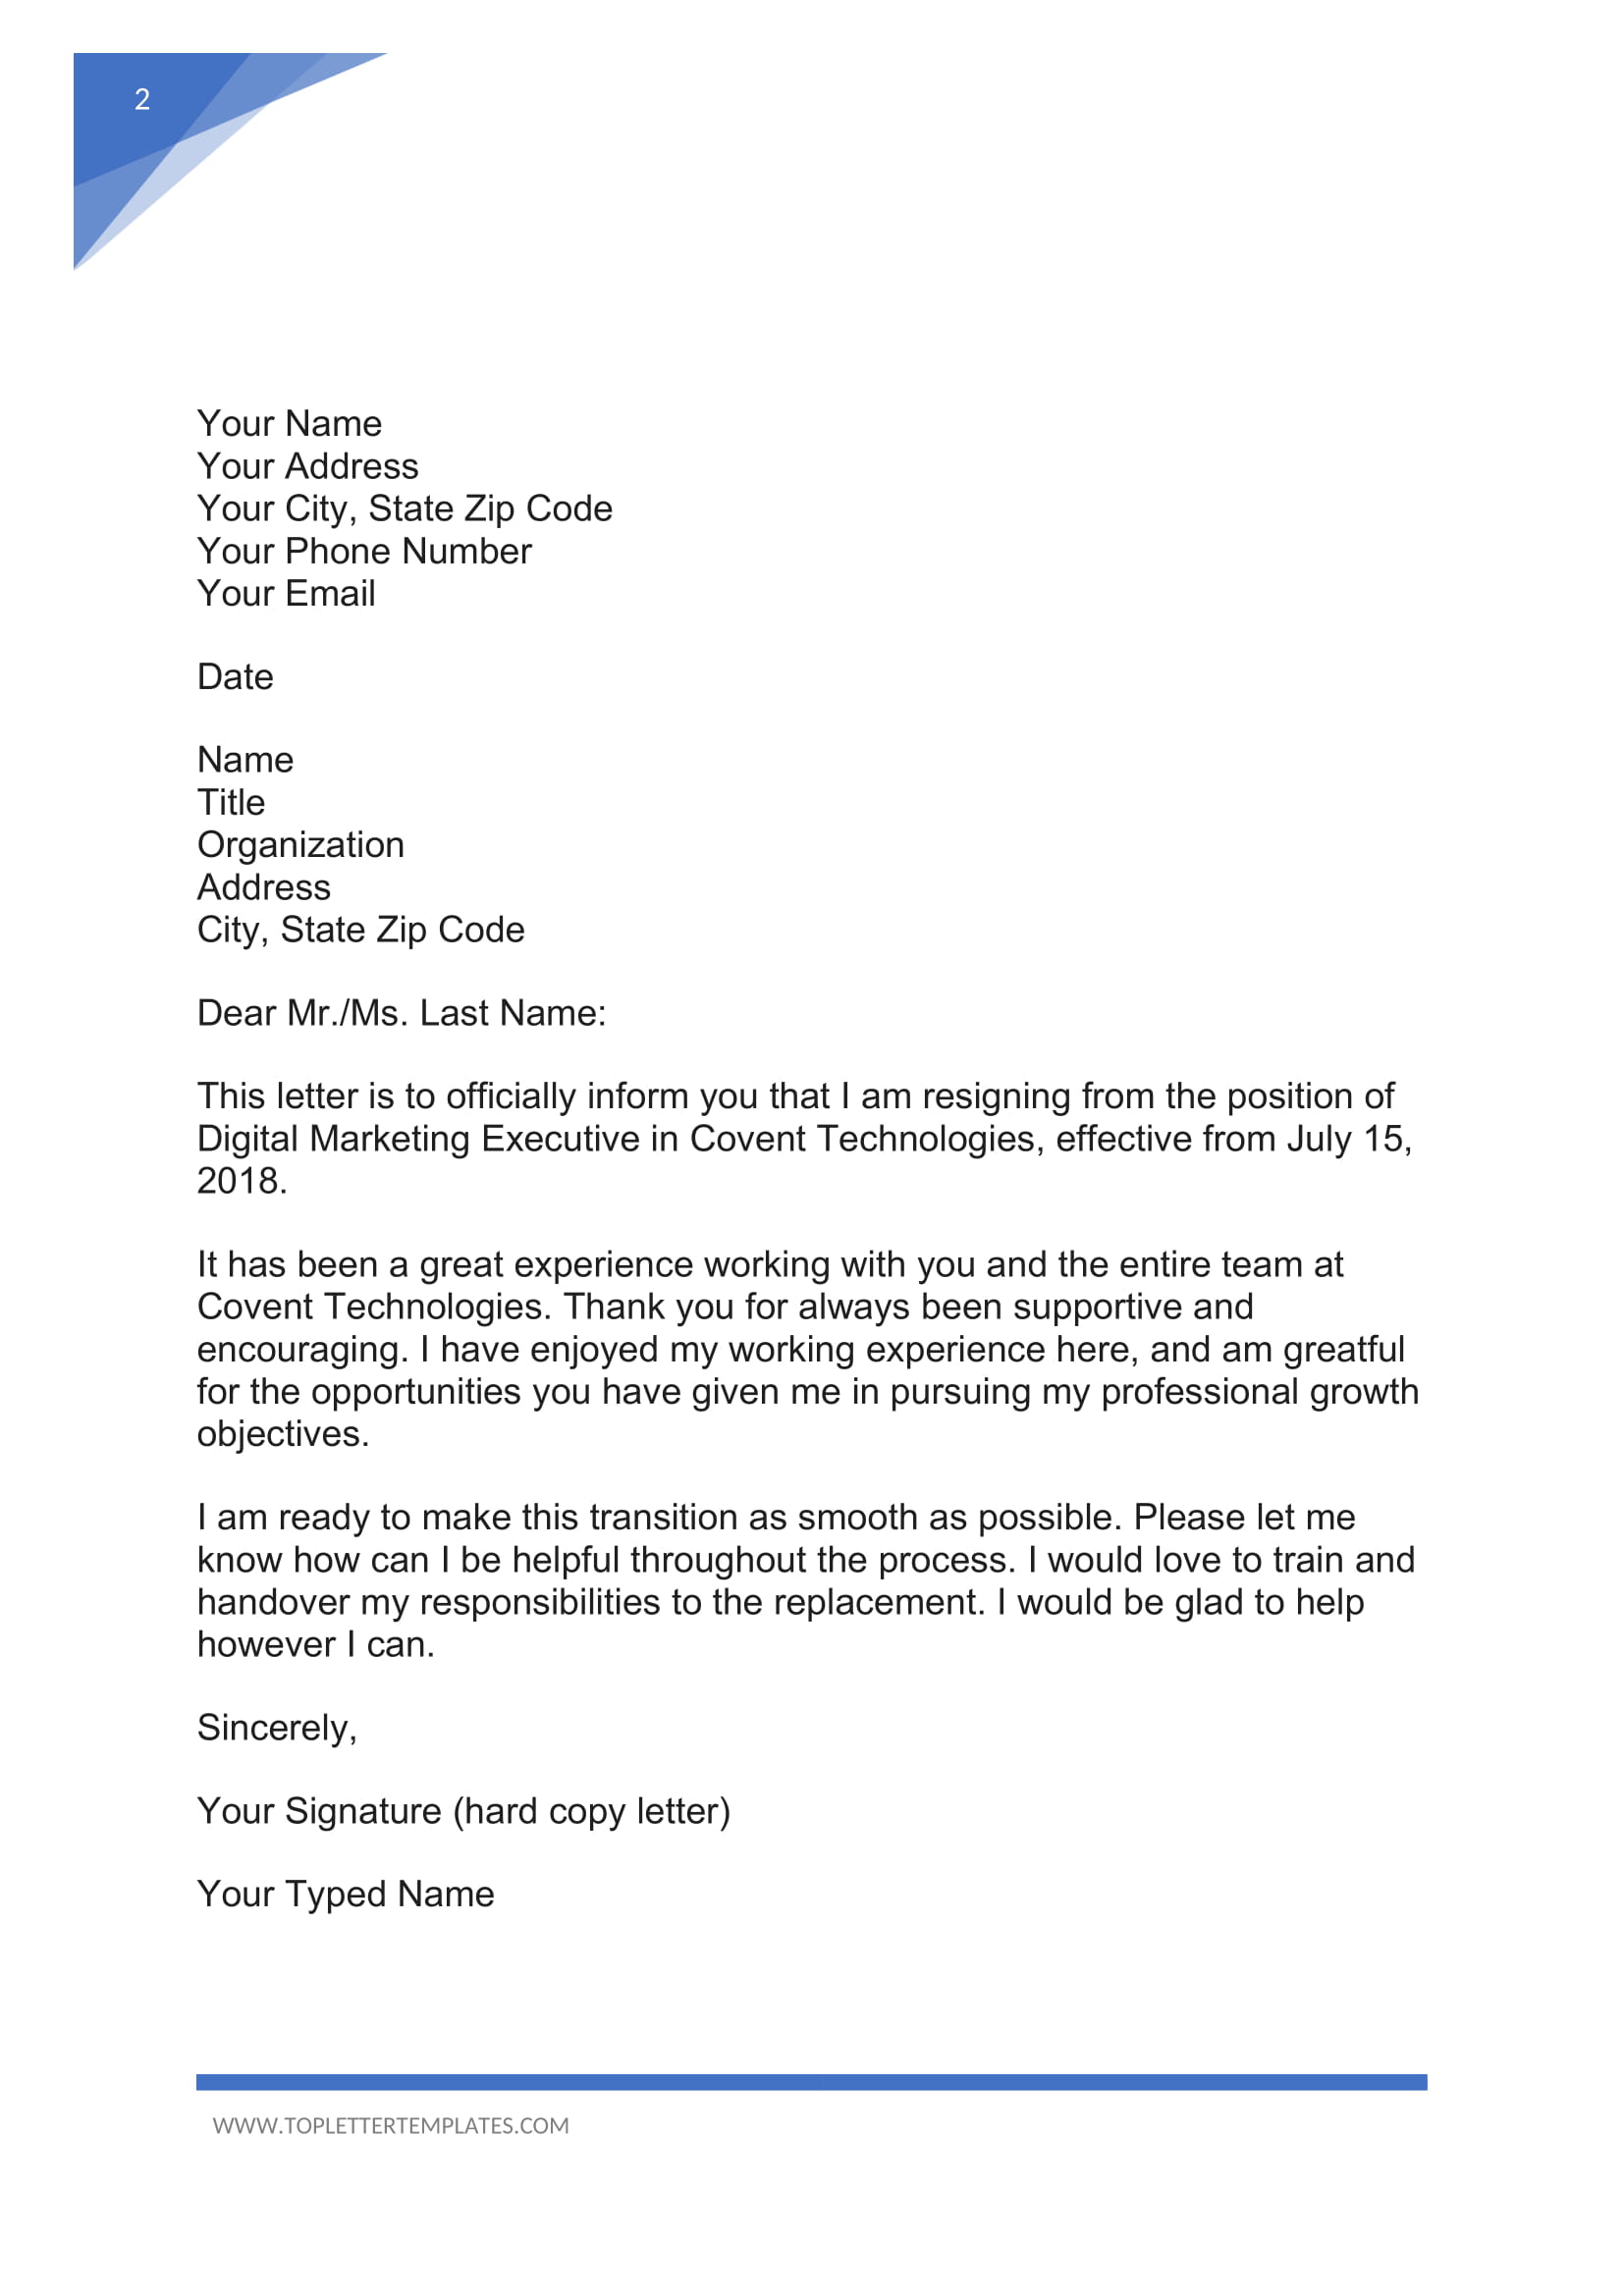 Resignation Letter Email Example from toplettertemplates.com